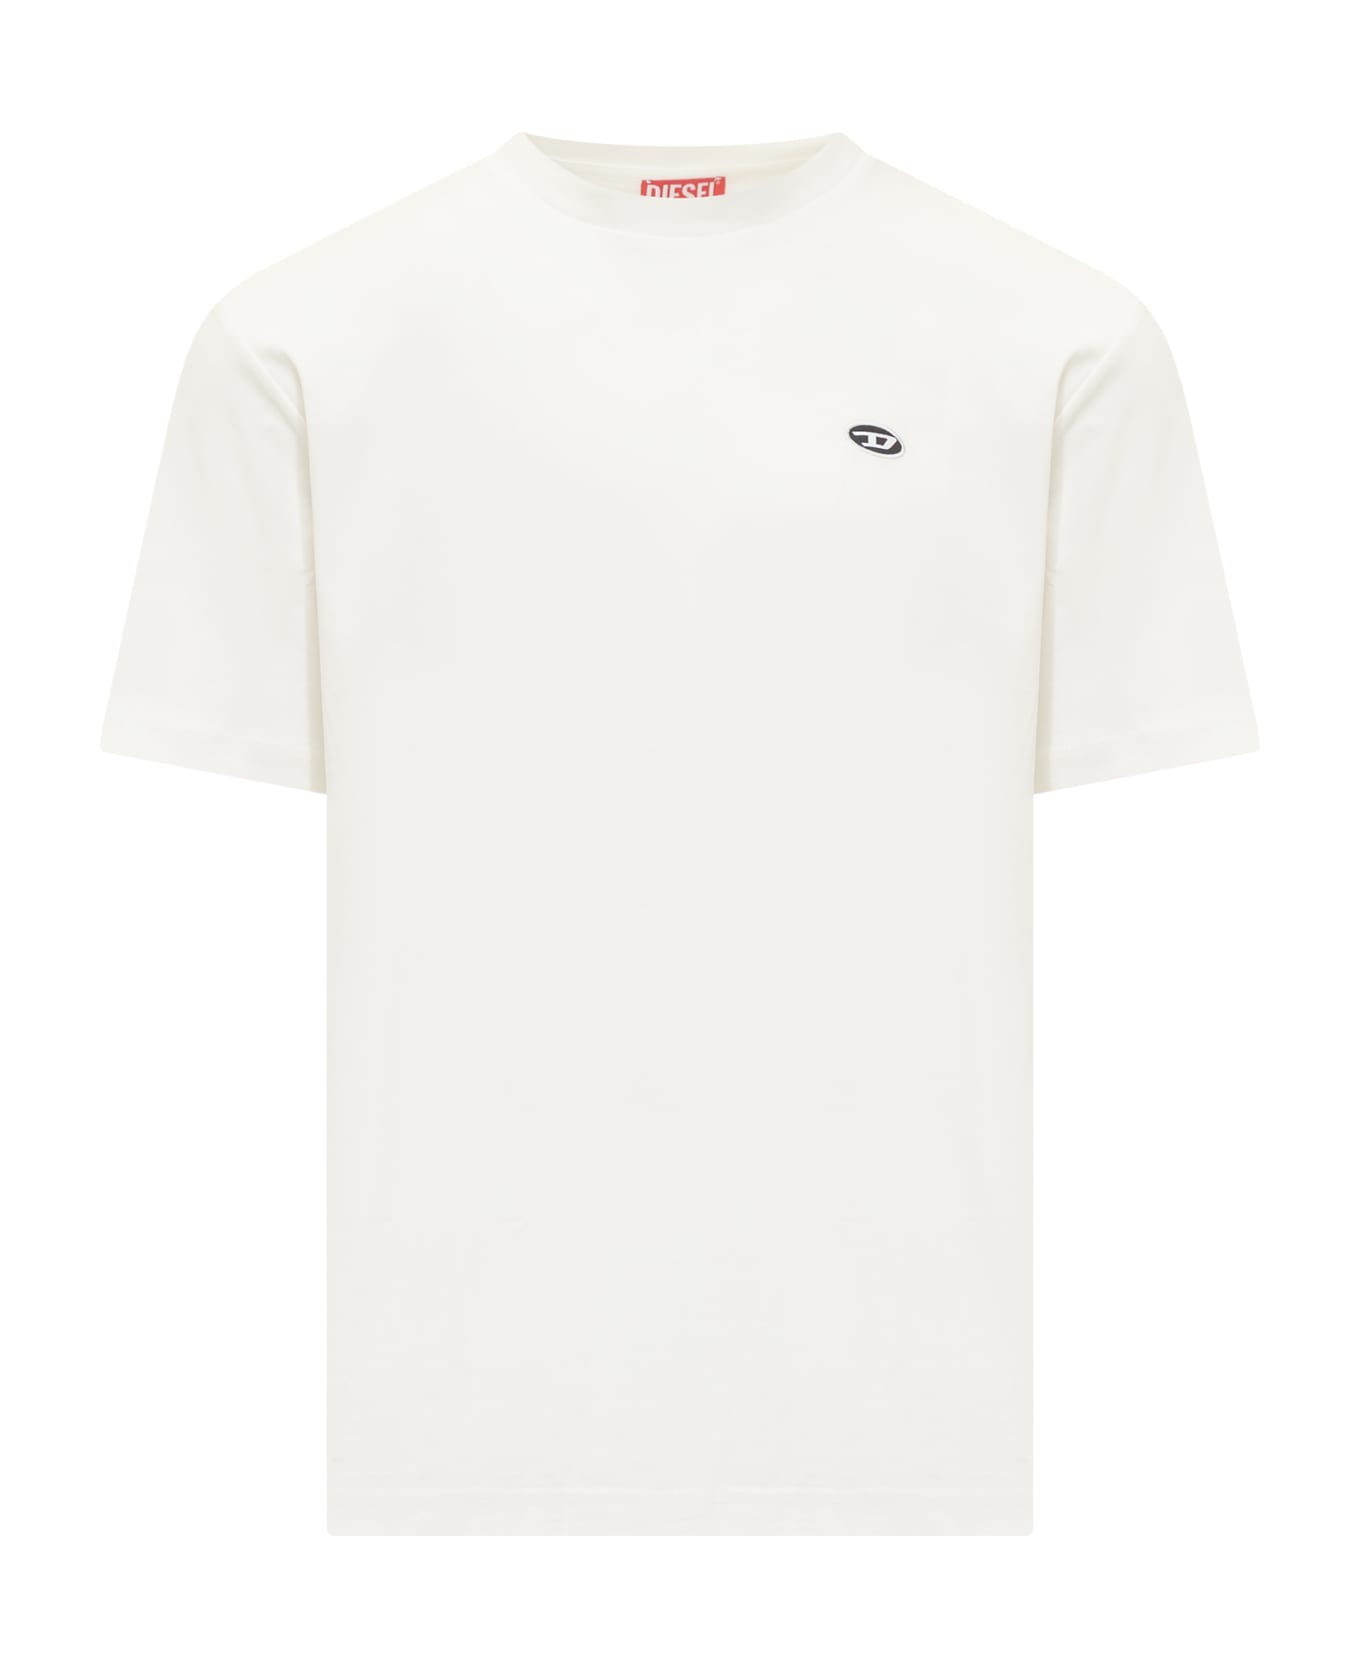 Diesel T-just -doval T-shirt - White